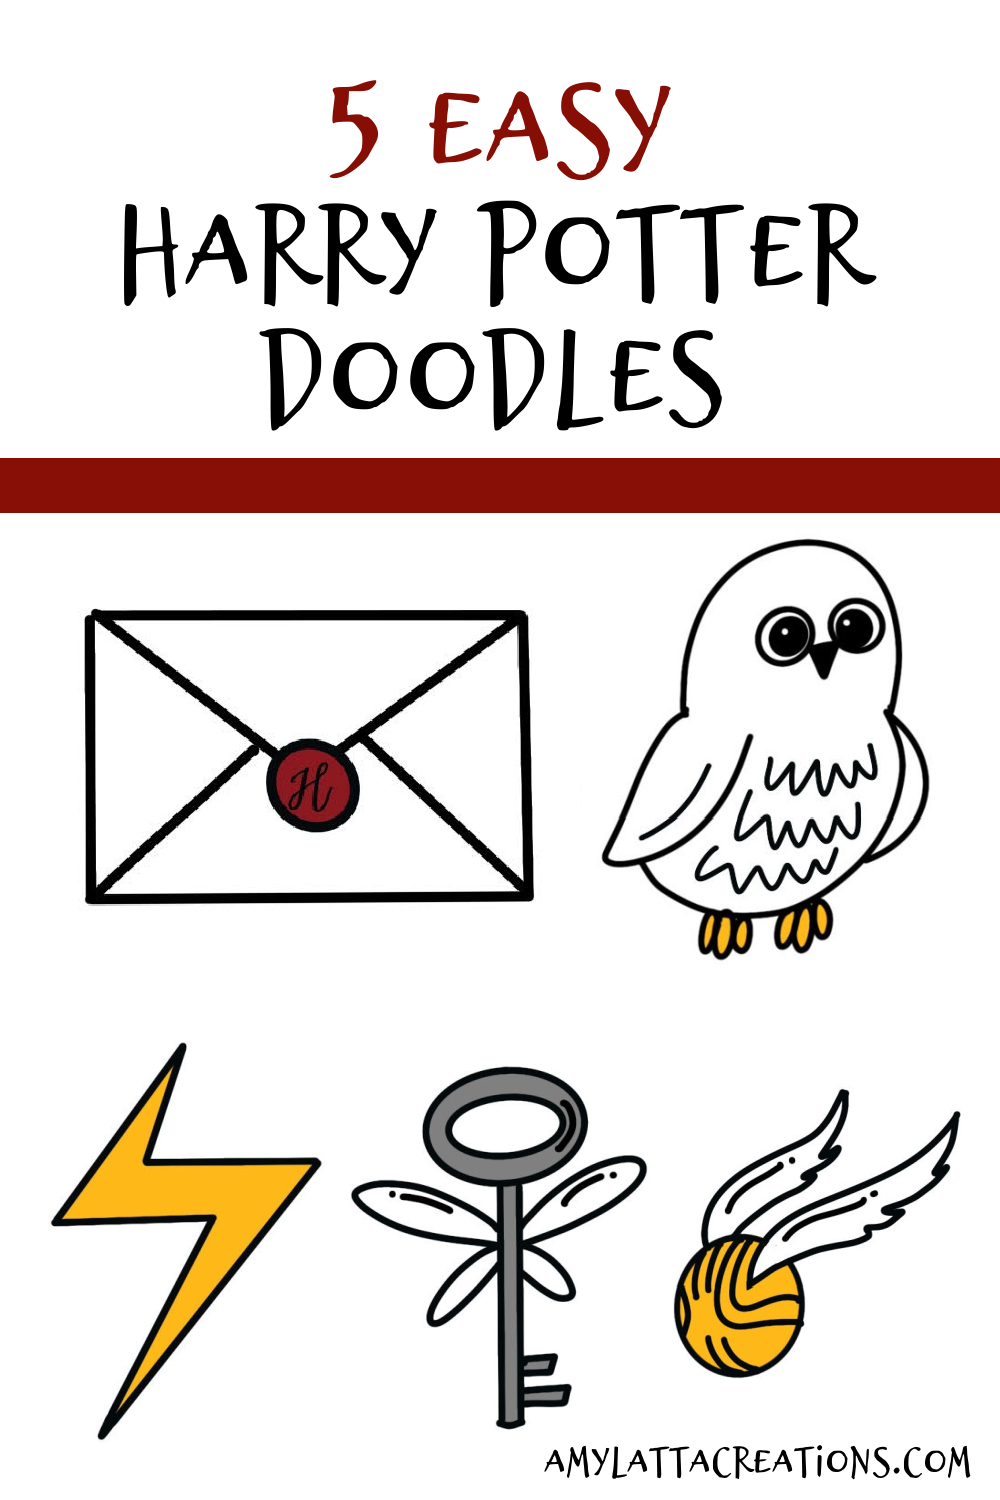 Harry Potter Logo Vector Images (over 100)